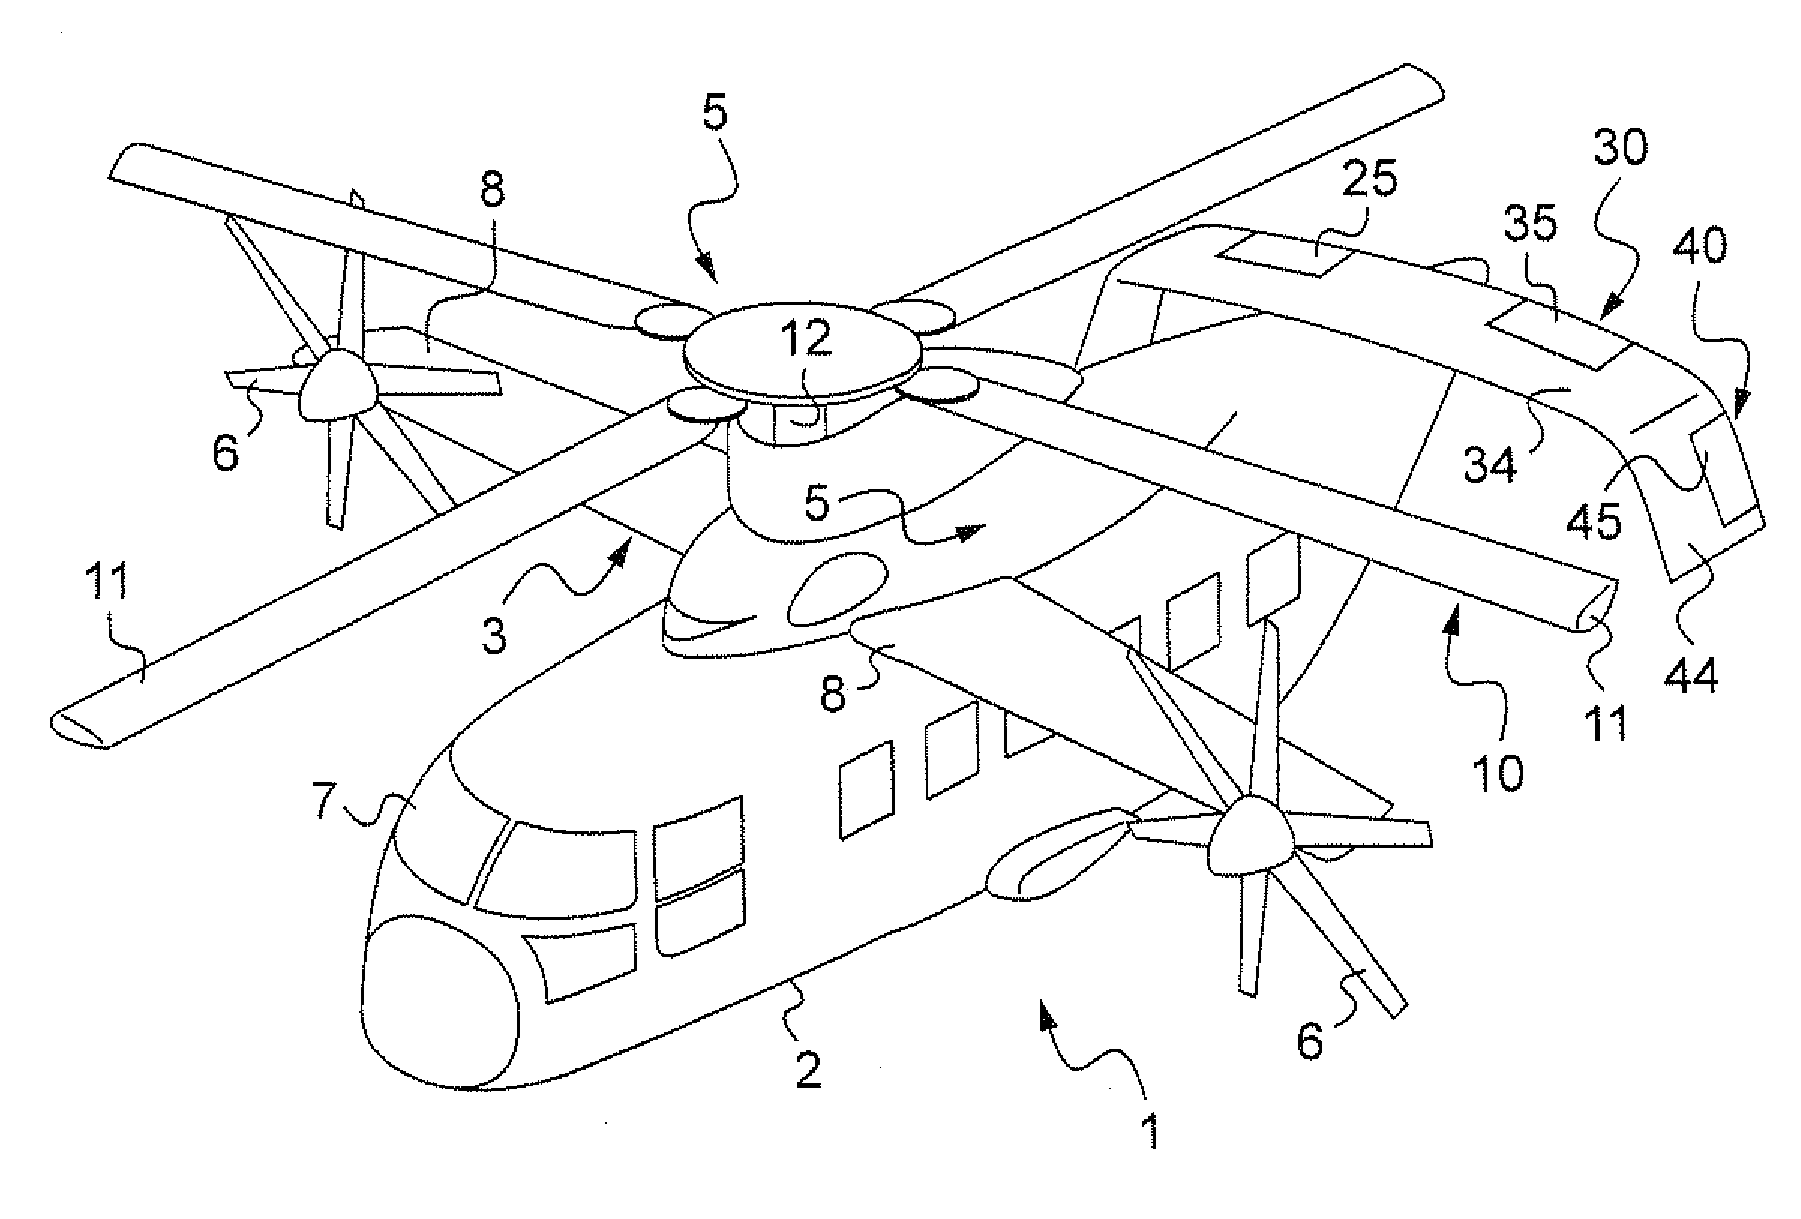 Fast hybrid helicopter with long range with longitudinal trim control